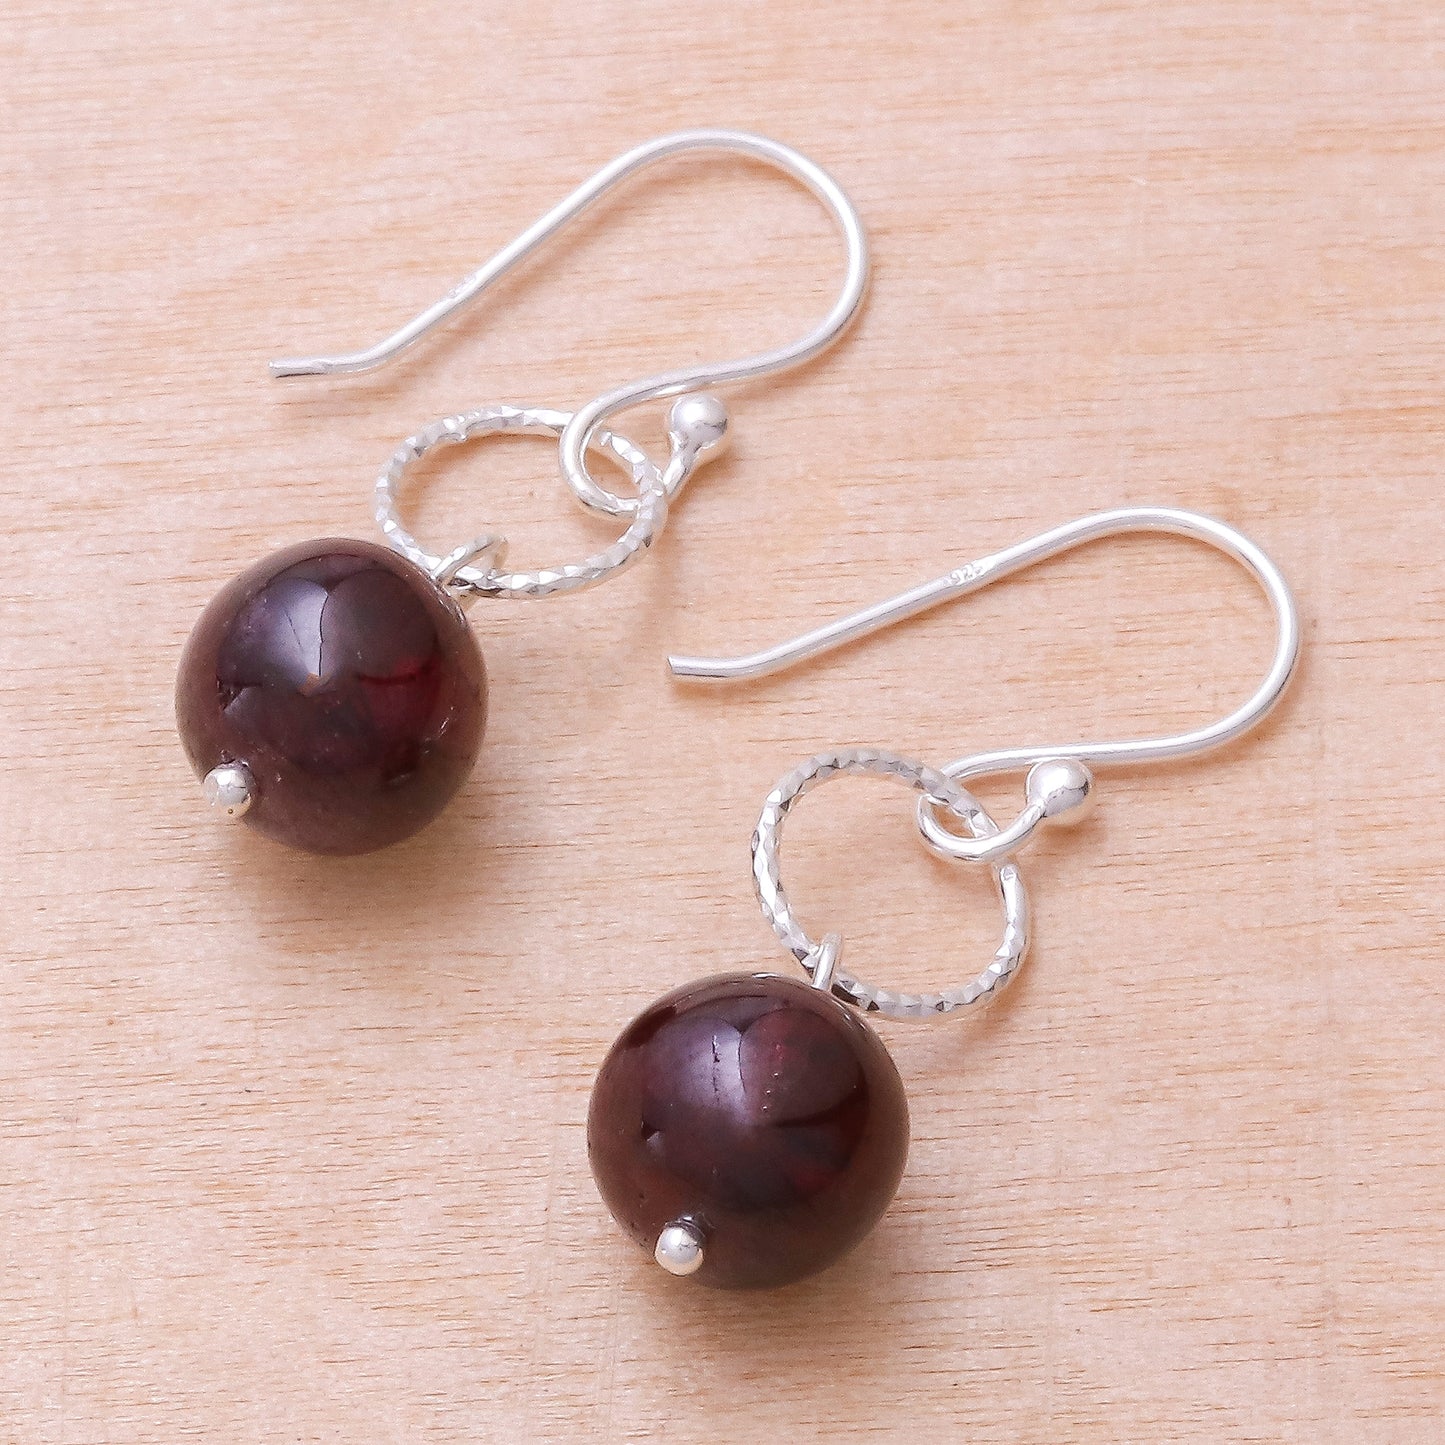 Ring Shimmer Round Garnet Dangle Earrings Crafted in Thailand